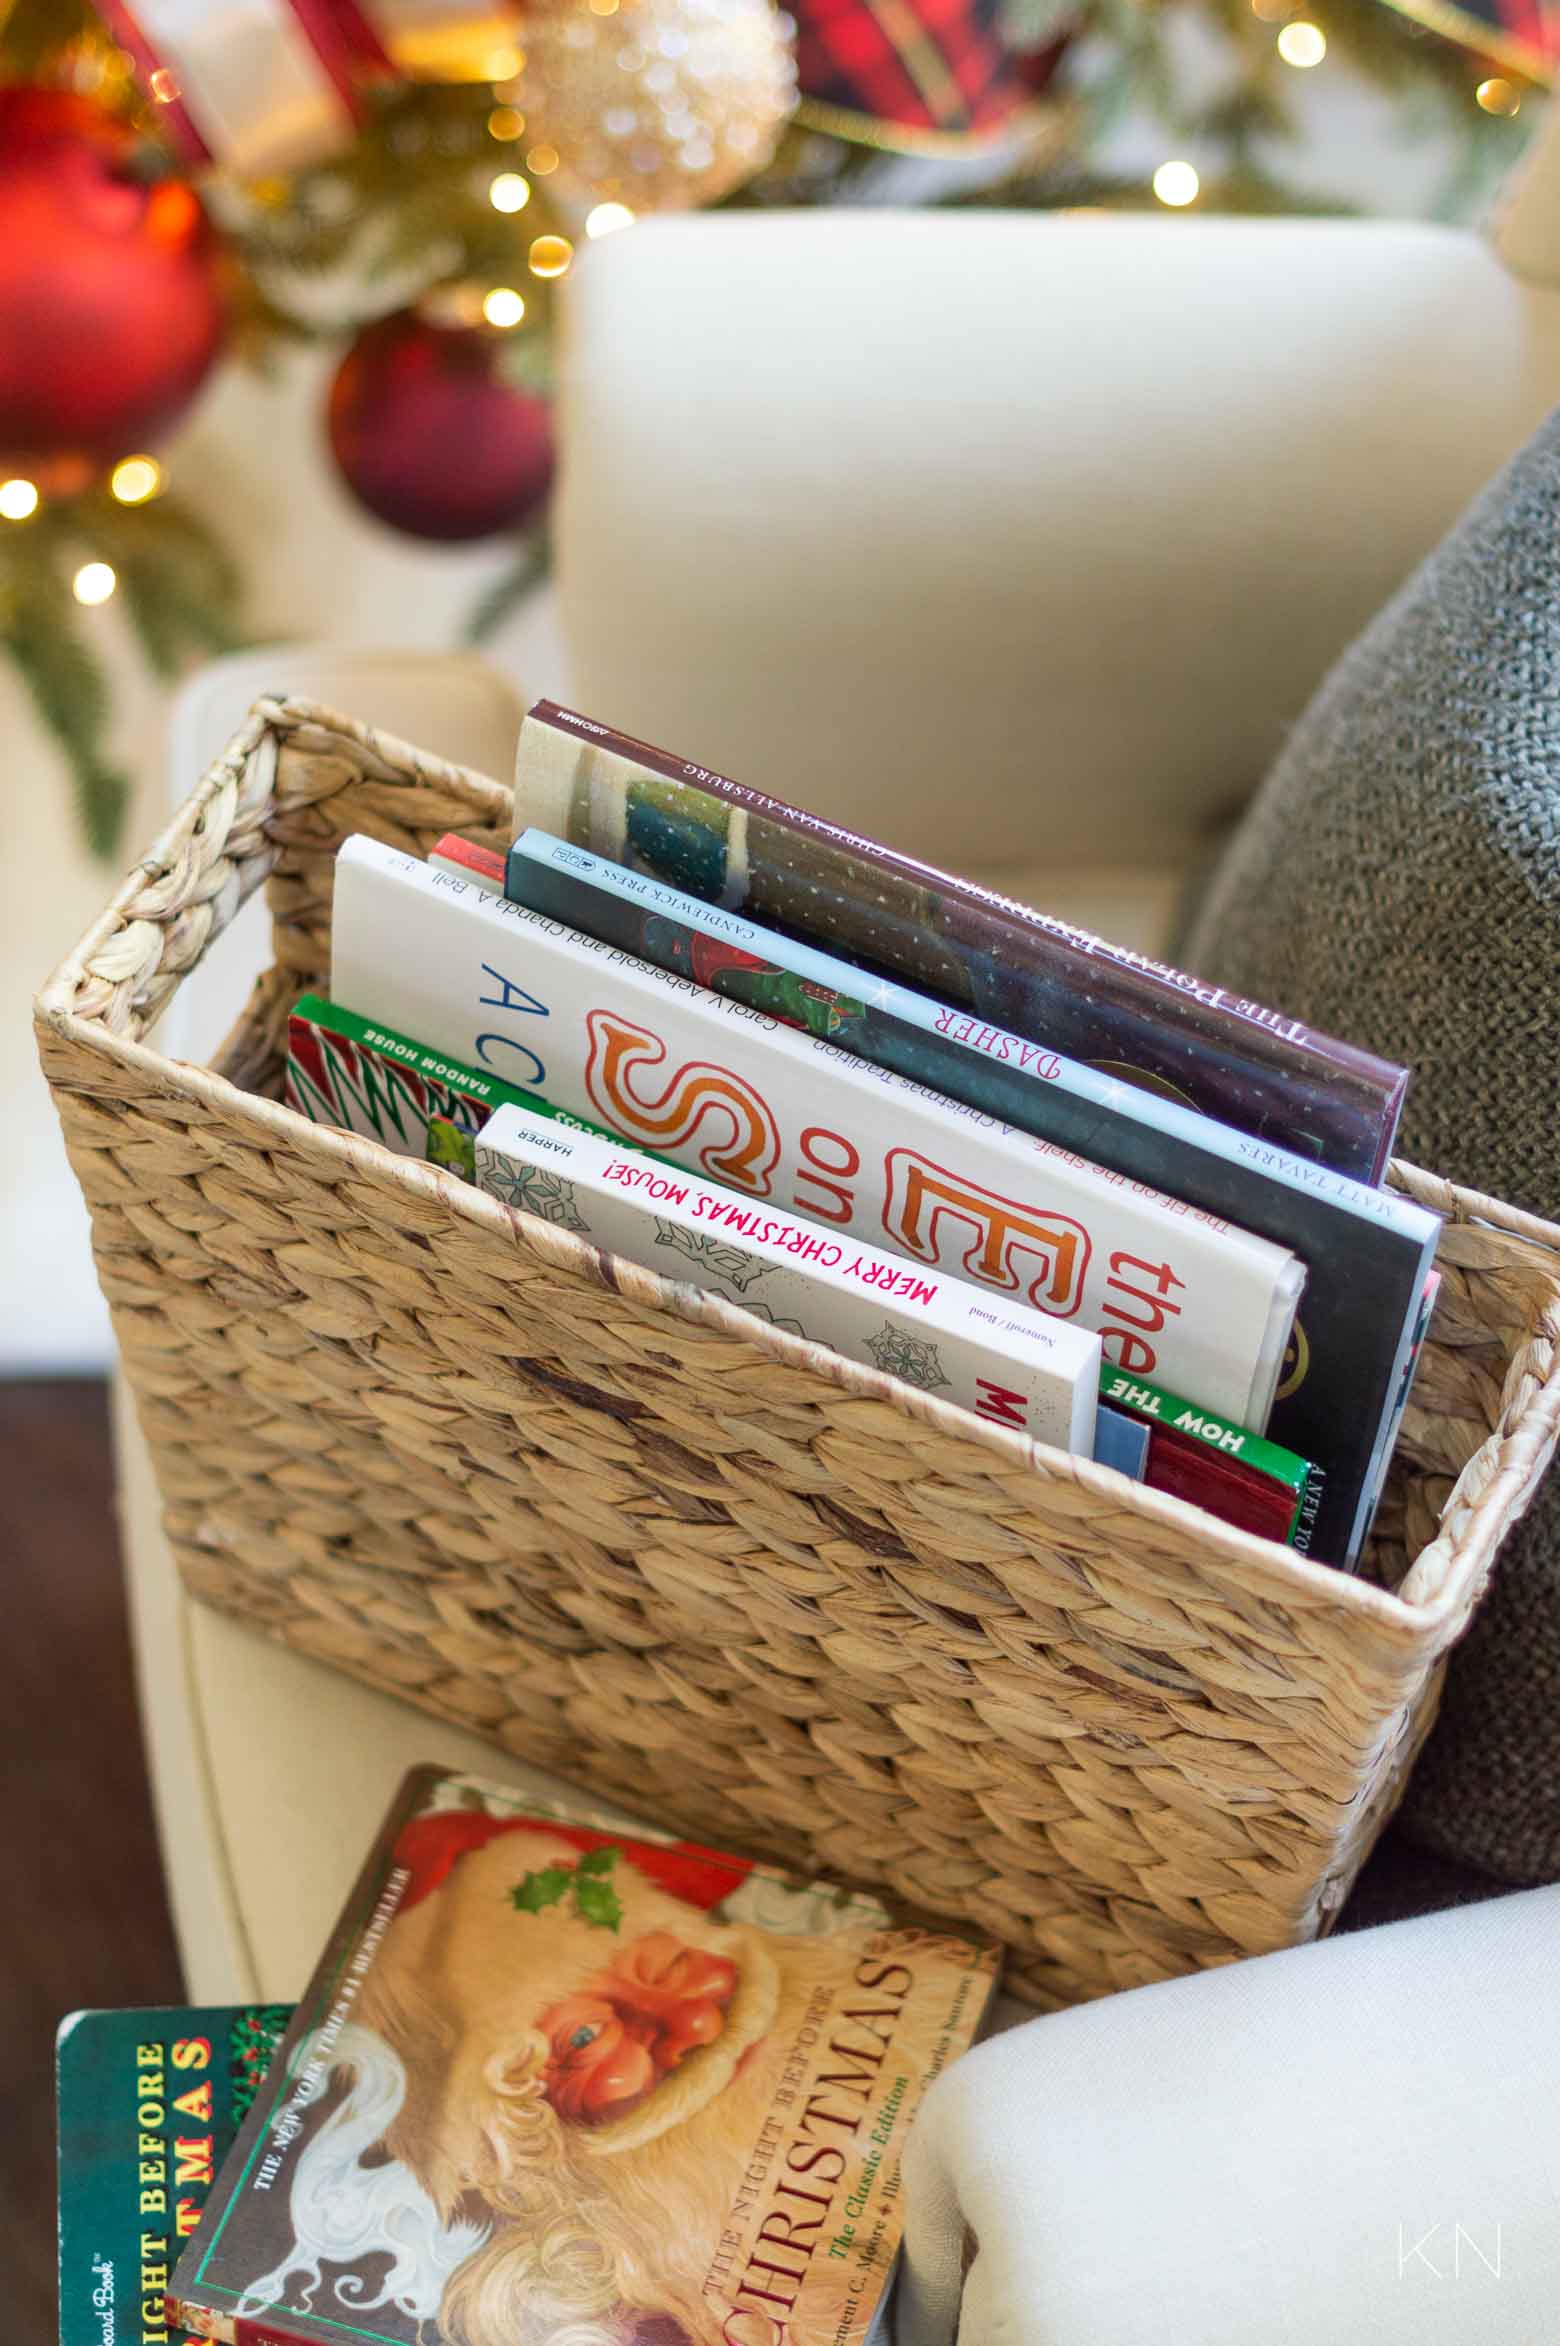 Idea to Store and Display Christmas Books